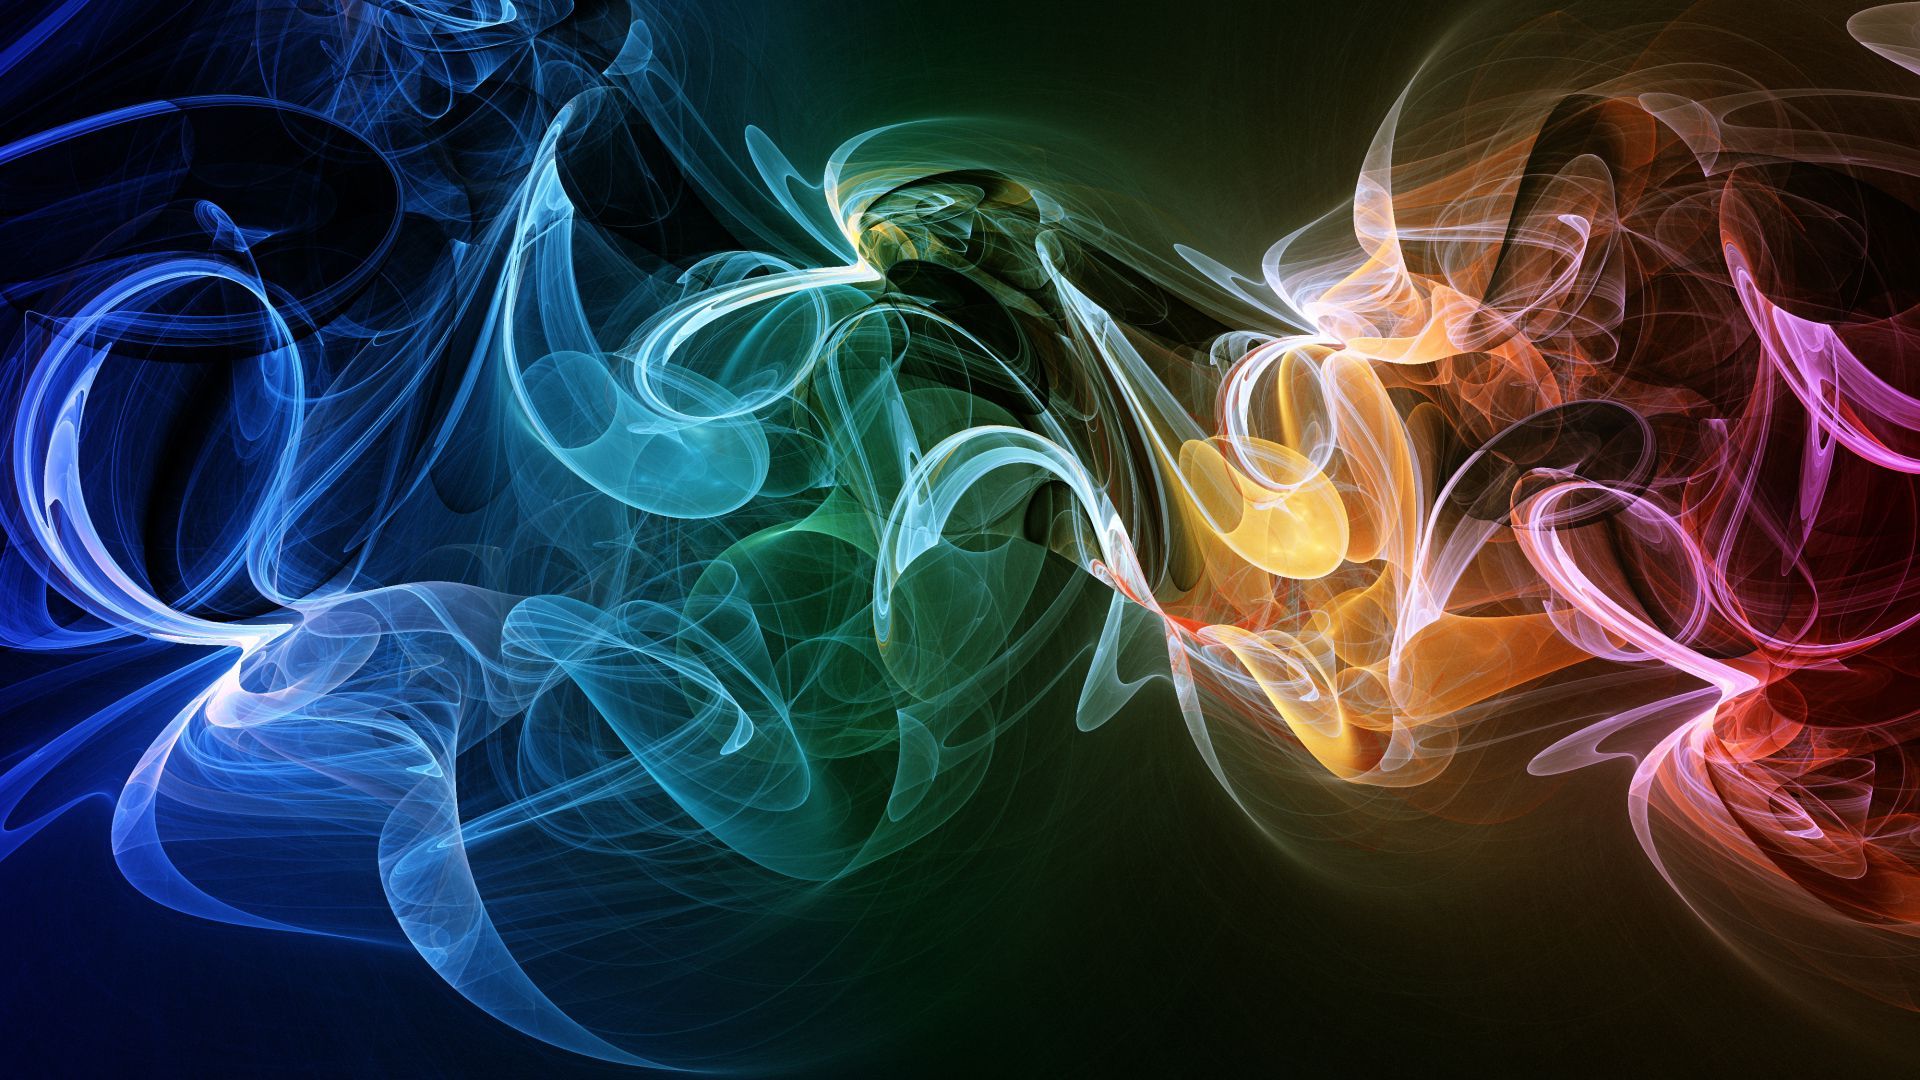 Abstract HD Wallpaper 1920X1080 - HD Images New